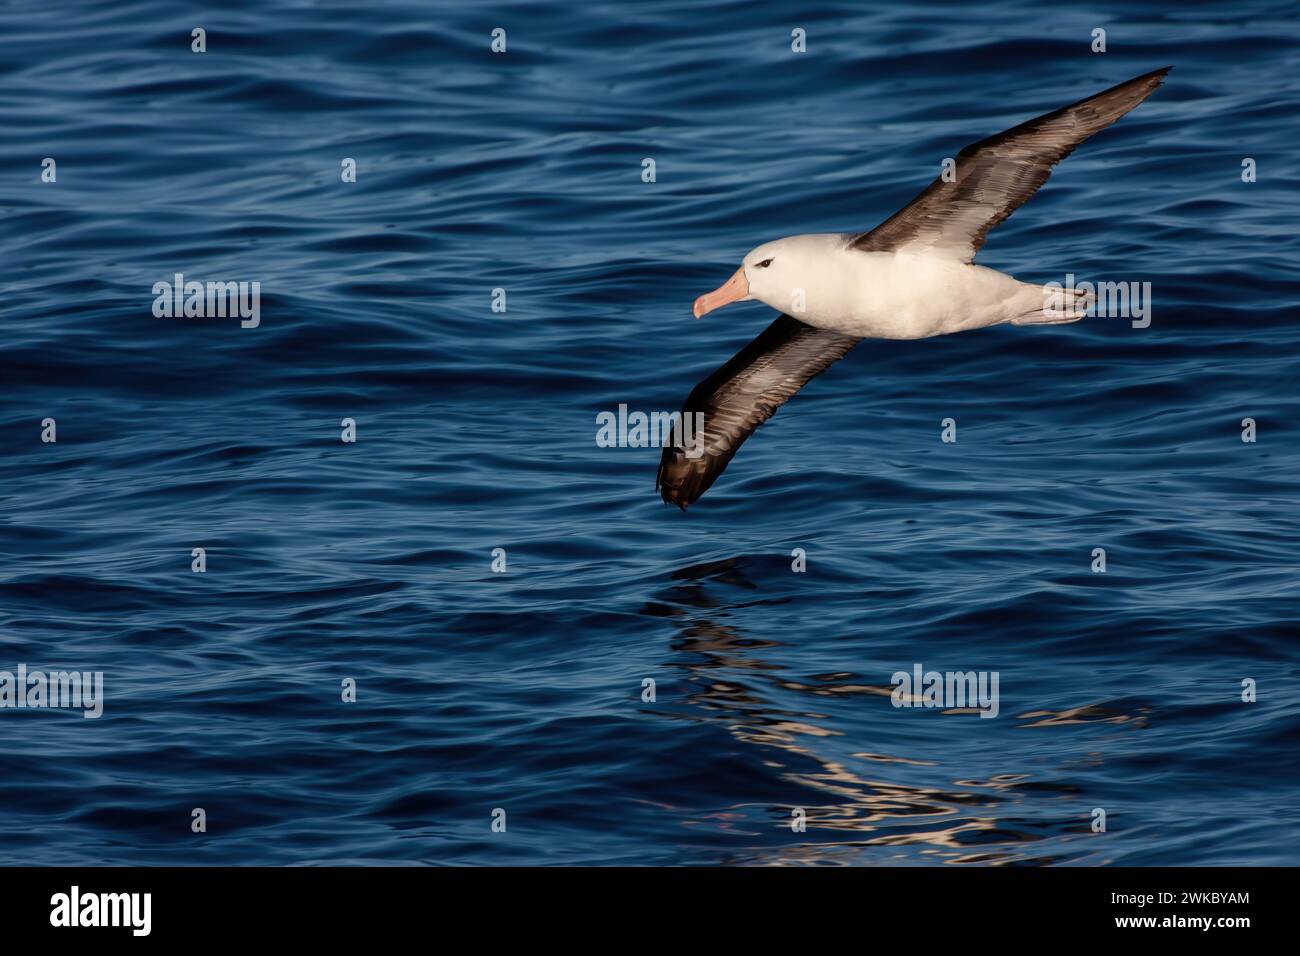 A Black-Browed Albatross ( Thalassarche melanophris ) gliding just above the ocean surface, Drake Passage between South America and Antarctica Stock Photo